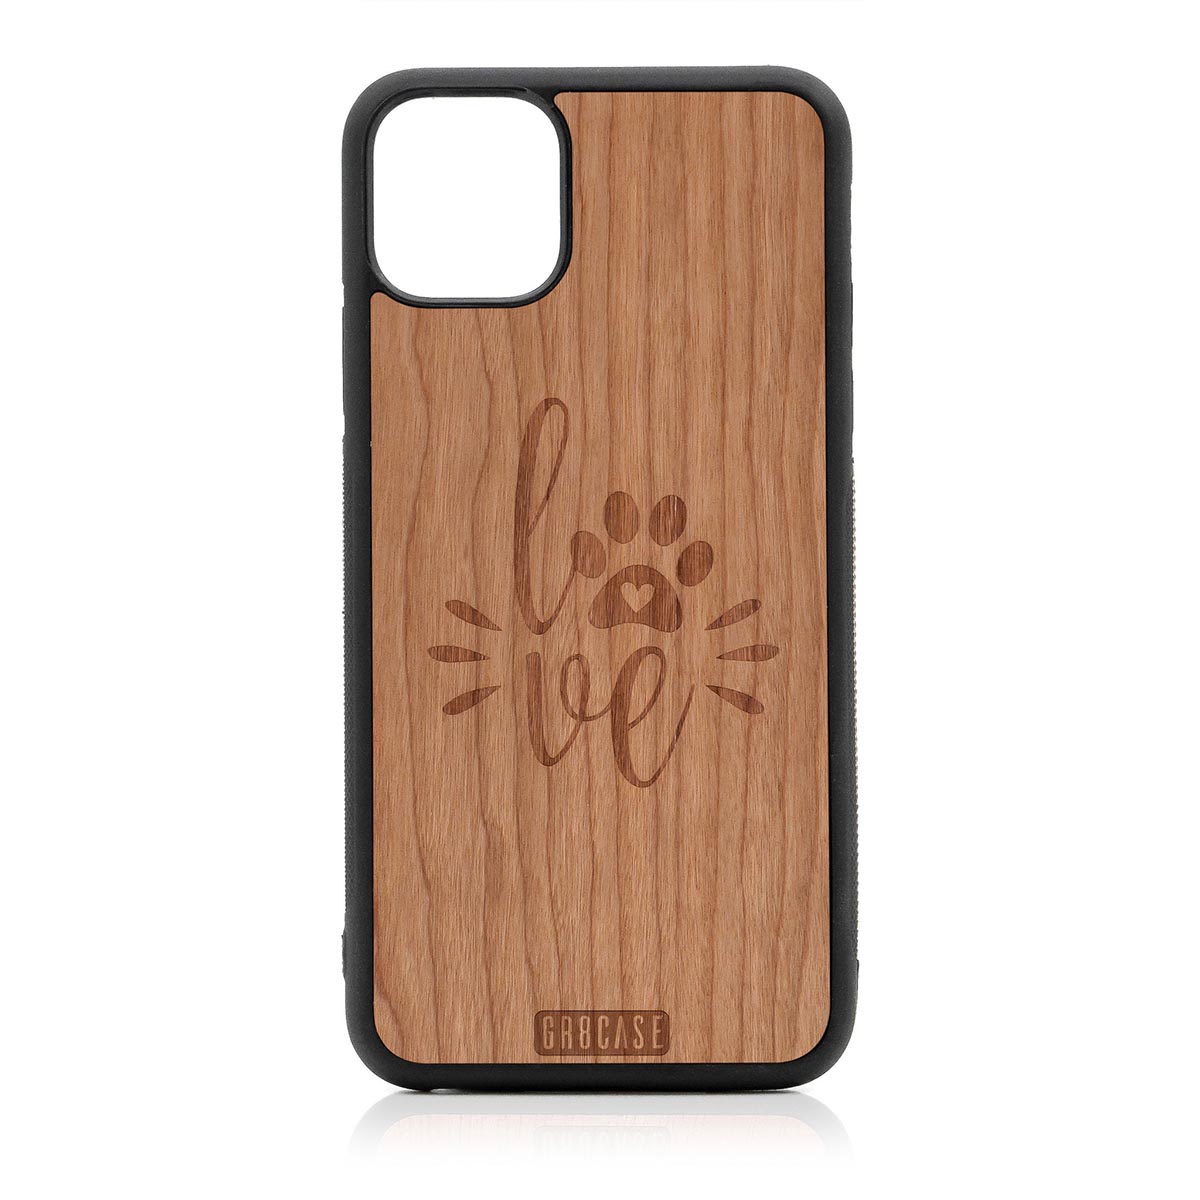 Paw Love Design Wood Case For iPhone 11 Pro Max by GR8CASE